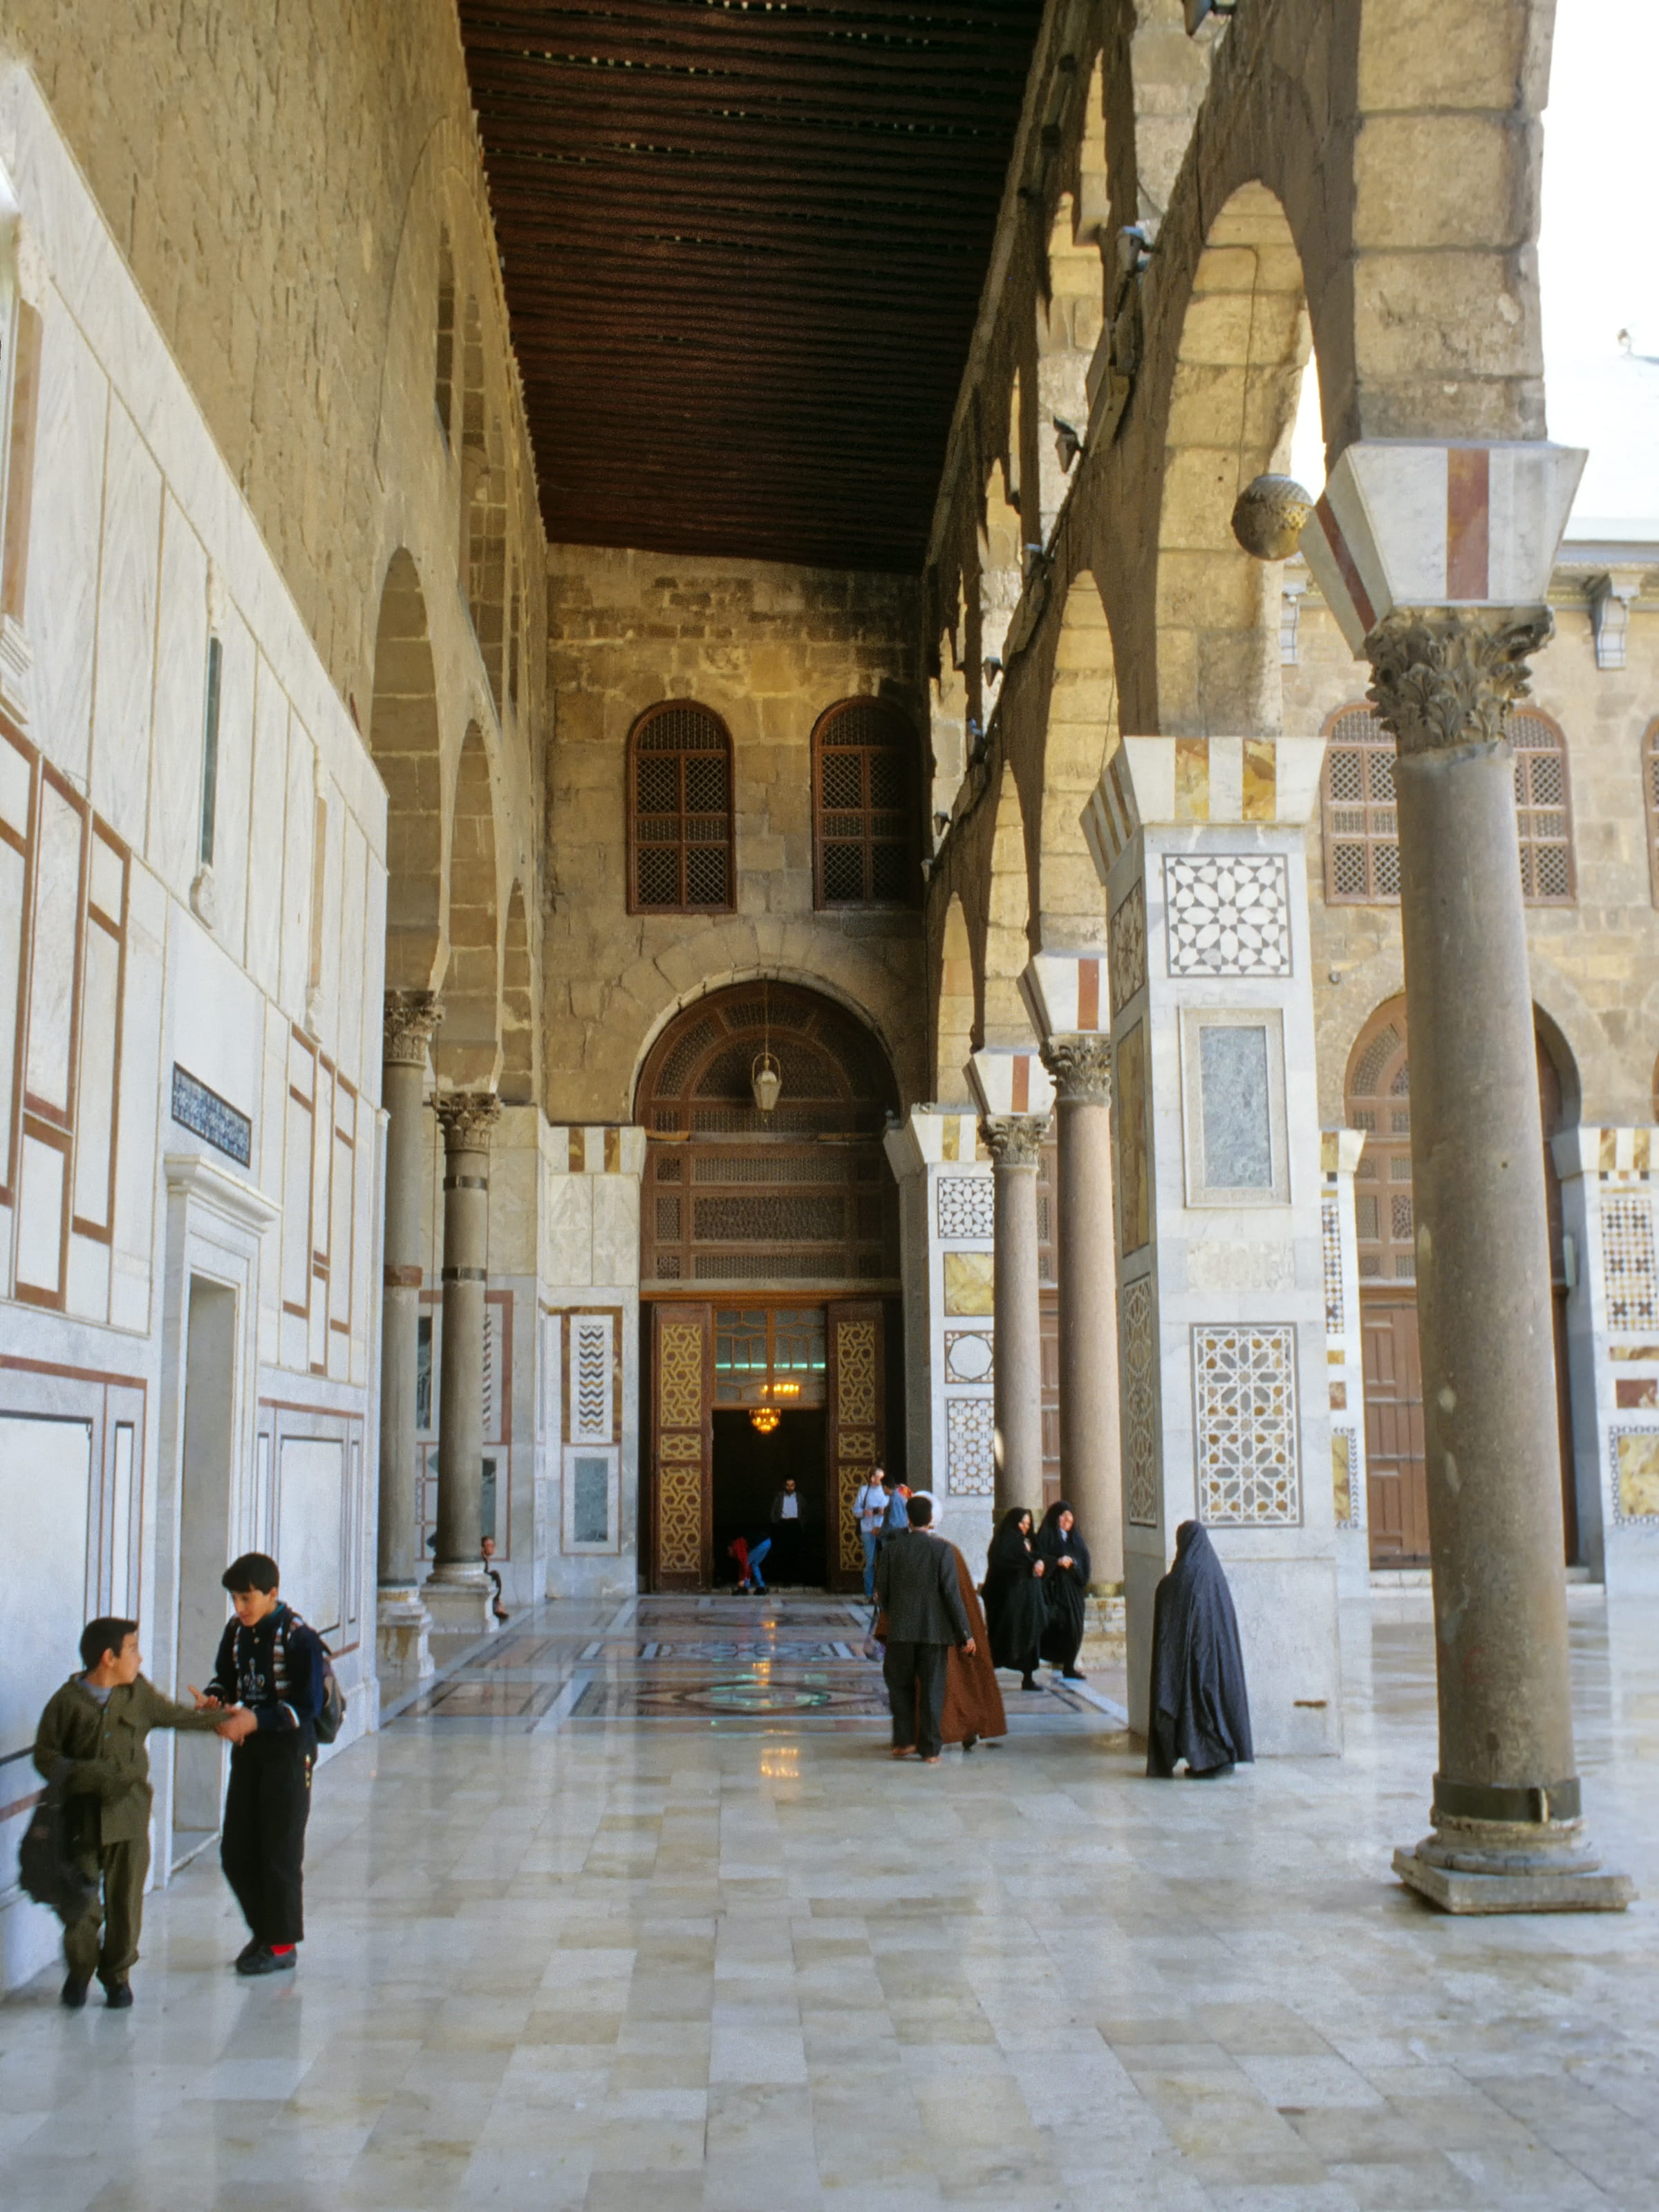 syria, damascus, omejaden, mosque, islam, architecture, history